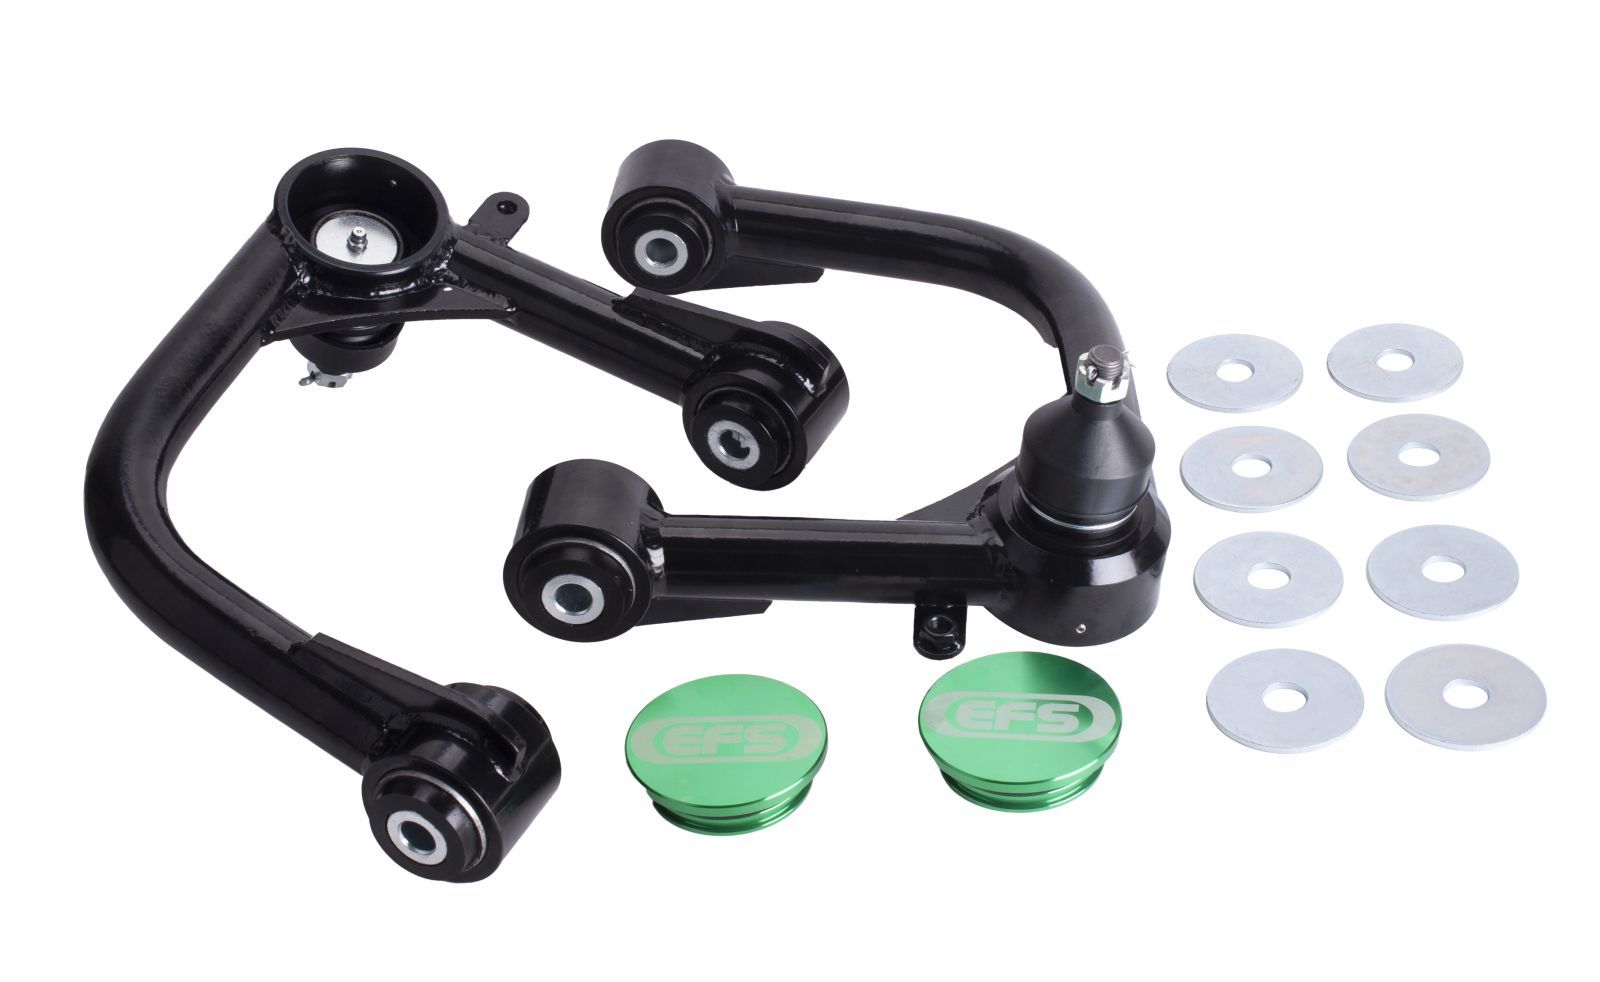 EFS Upper Control Arm to suit Ford Ranger / Mazda Bt50 12+